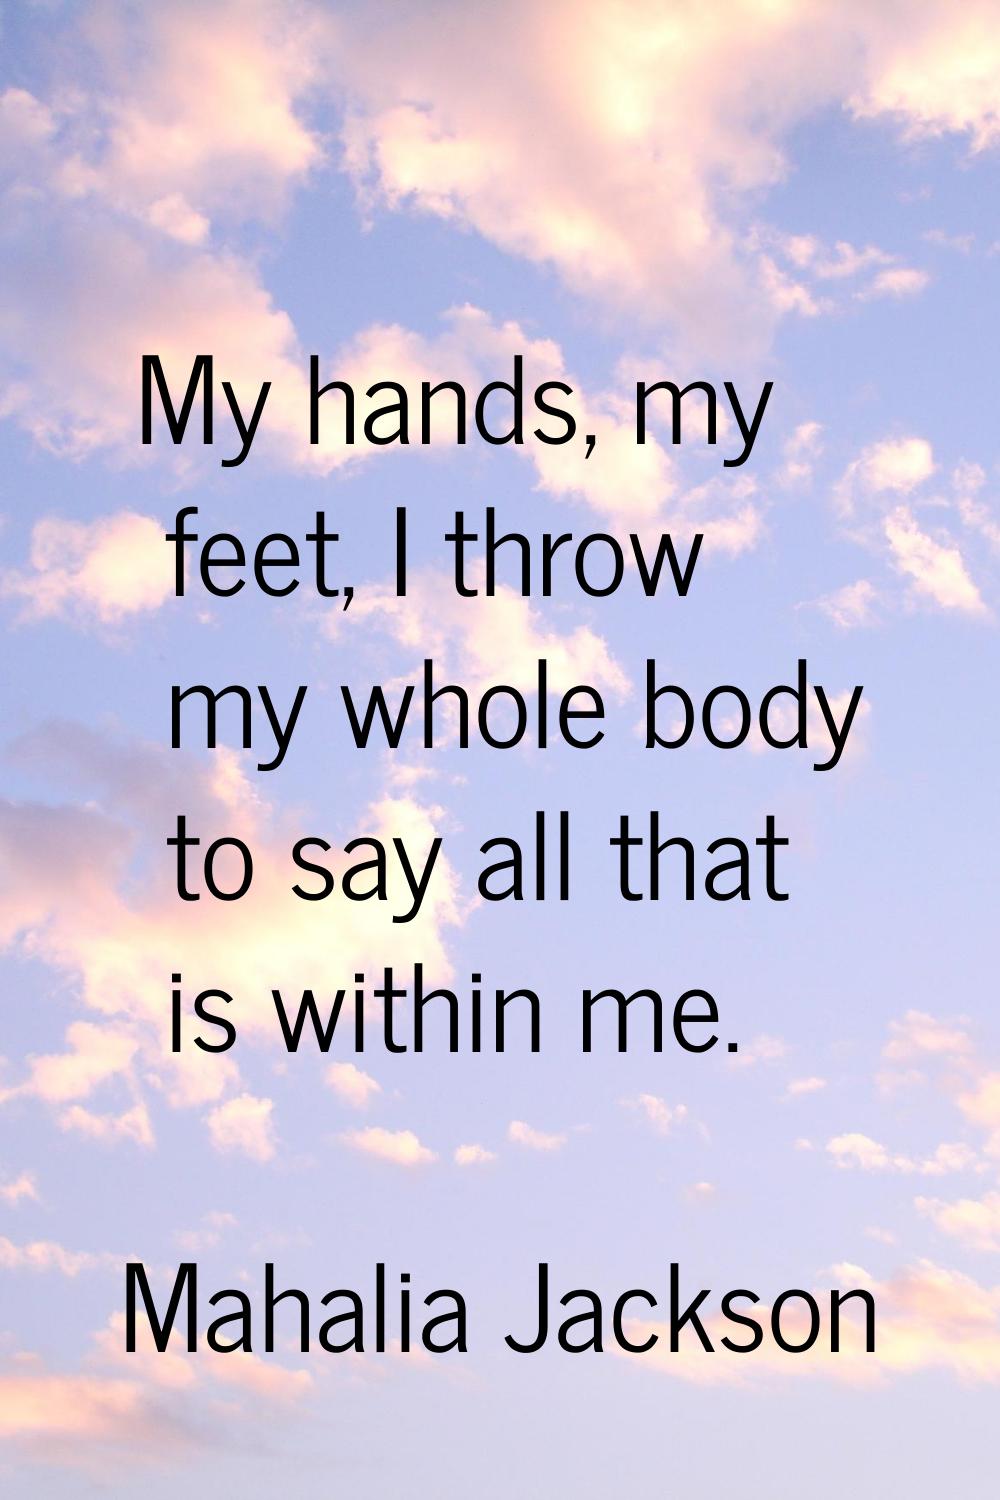 My hands, my feet, I throw my whole body to say all that is within me.